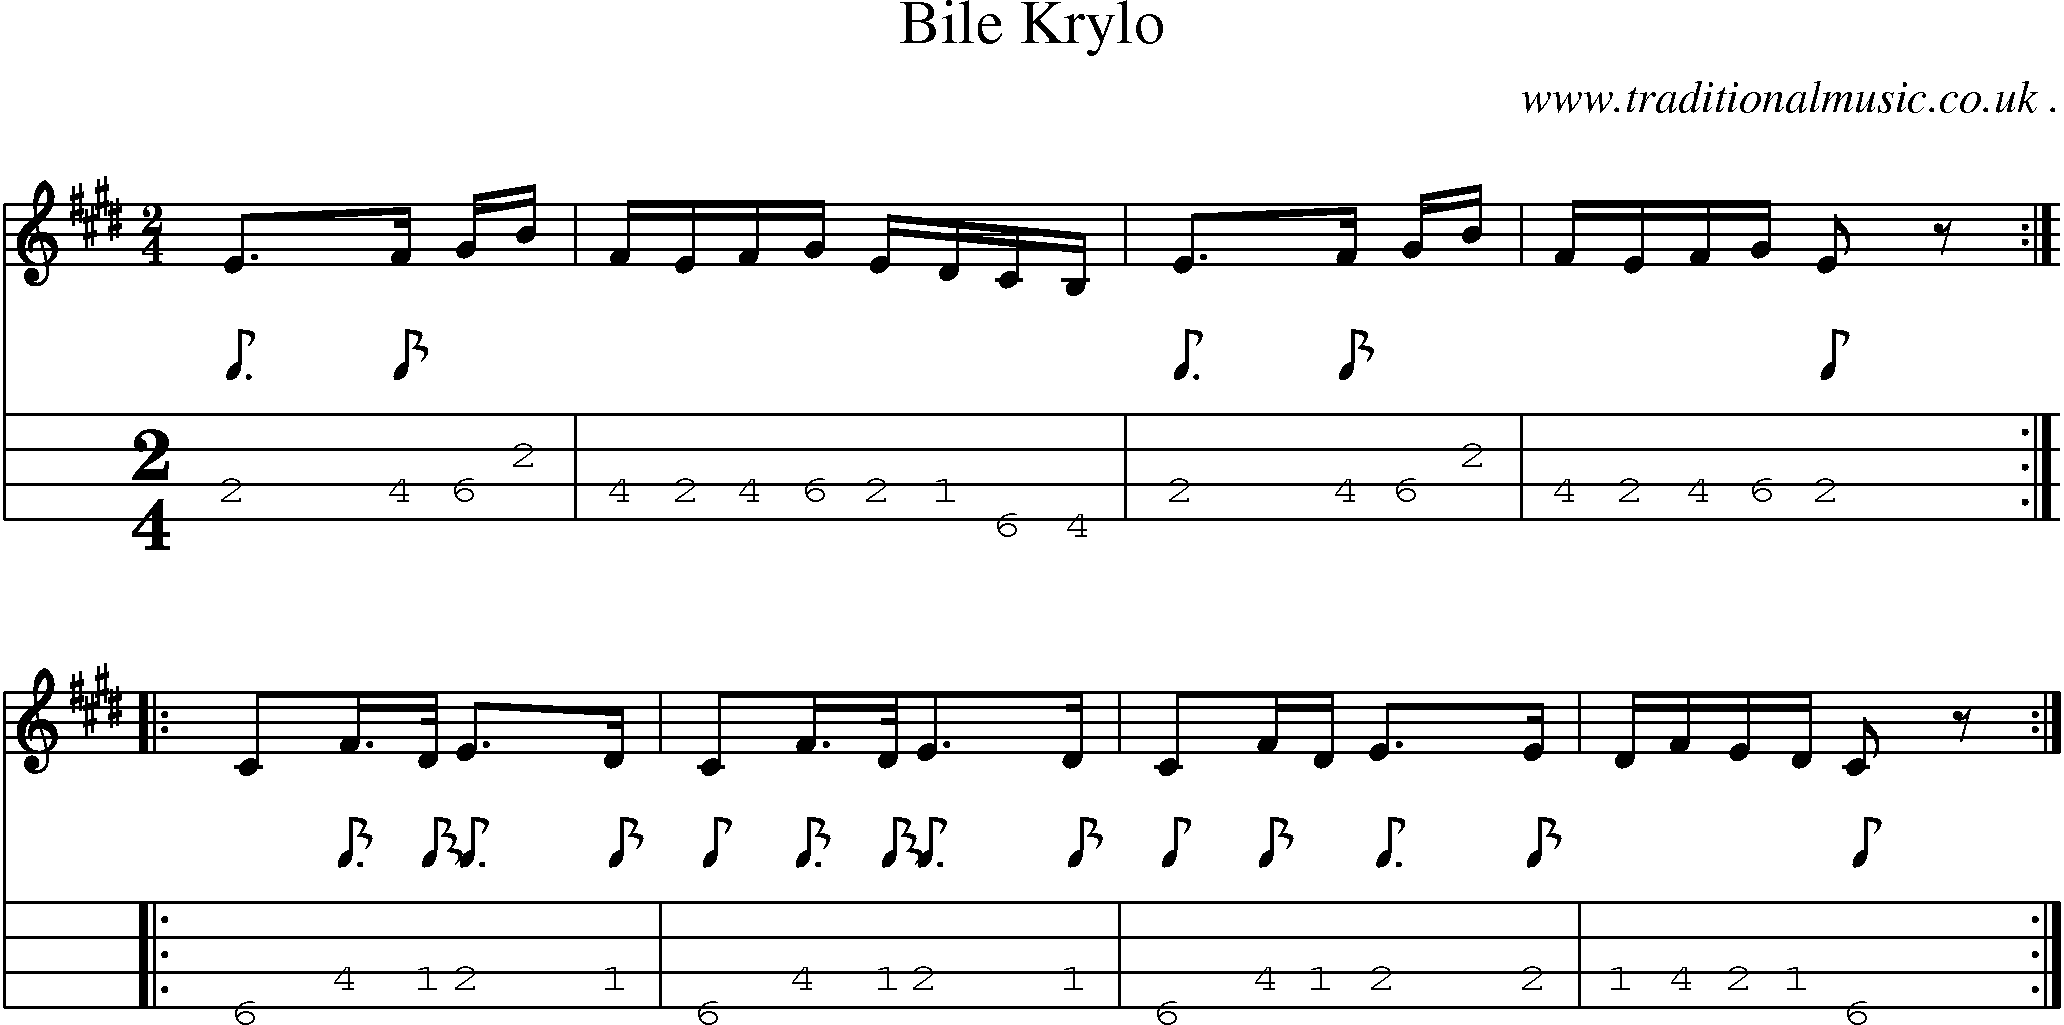 Sheet-Music and Mandolin Tabs for Bile Krylo